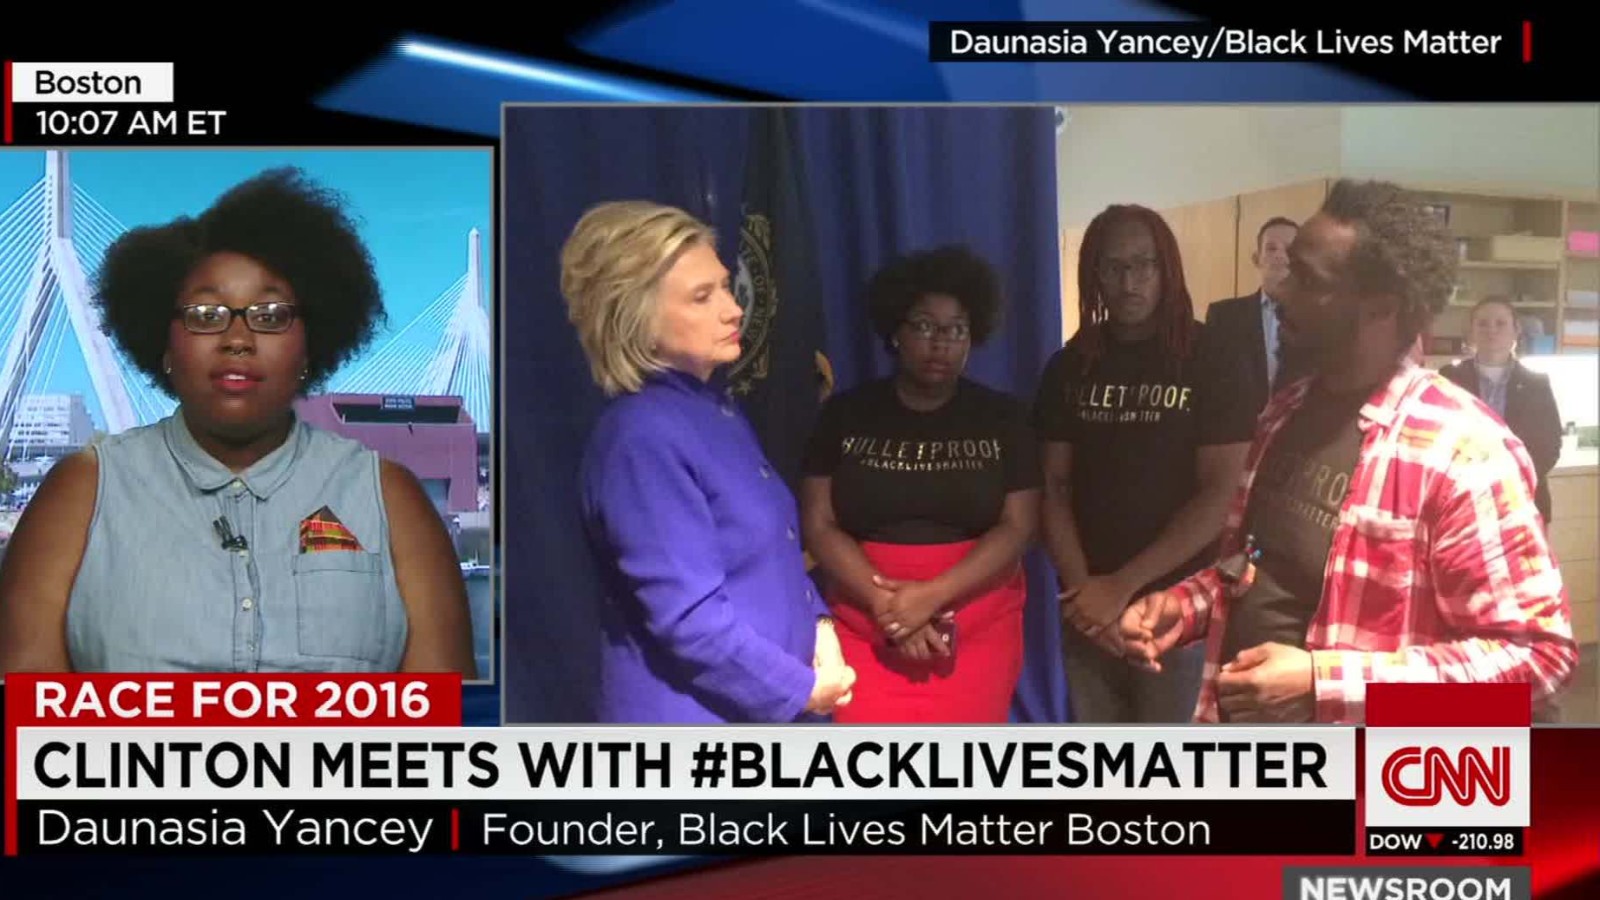 Hillary Clinton To Hold Important Meeting With Black Activists On